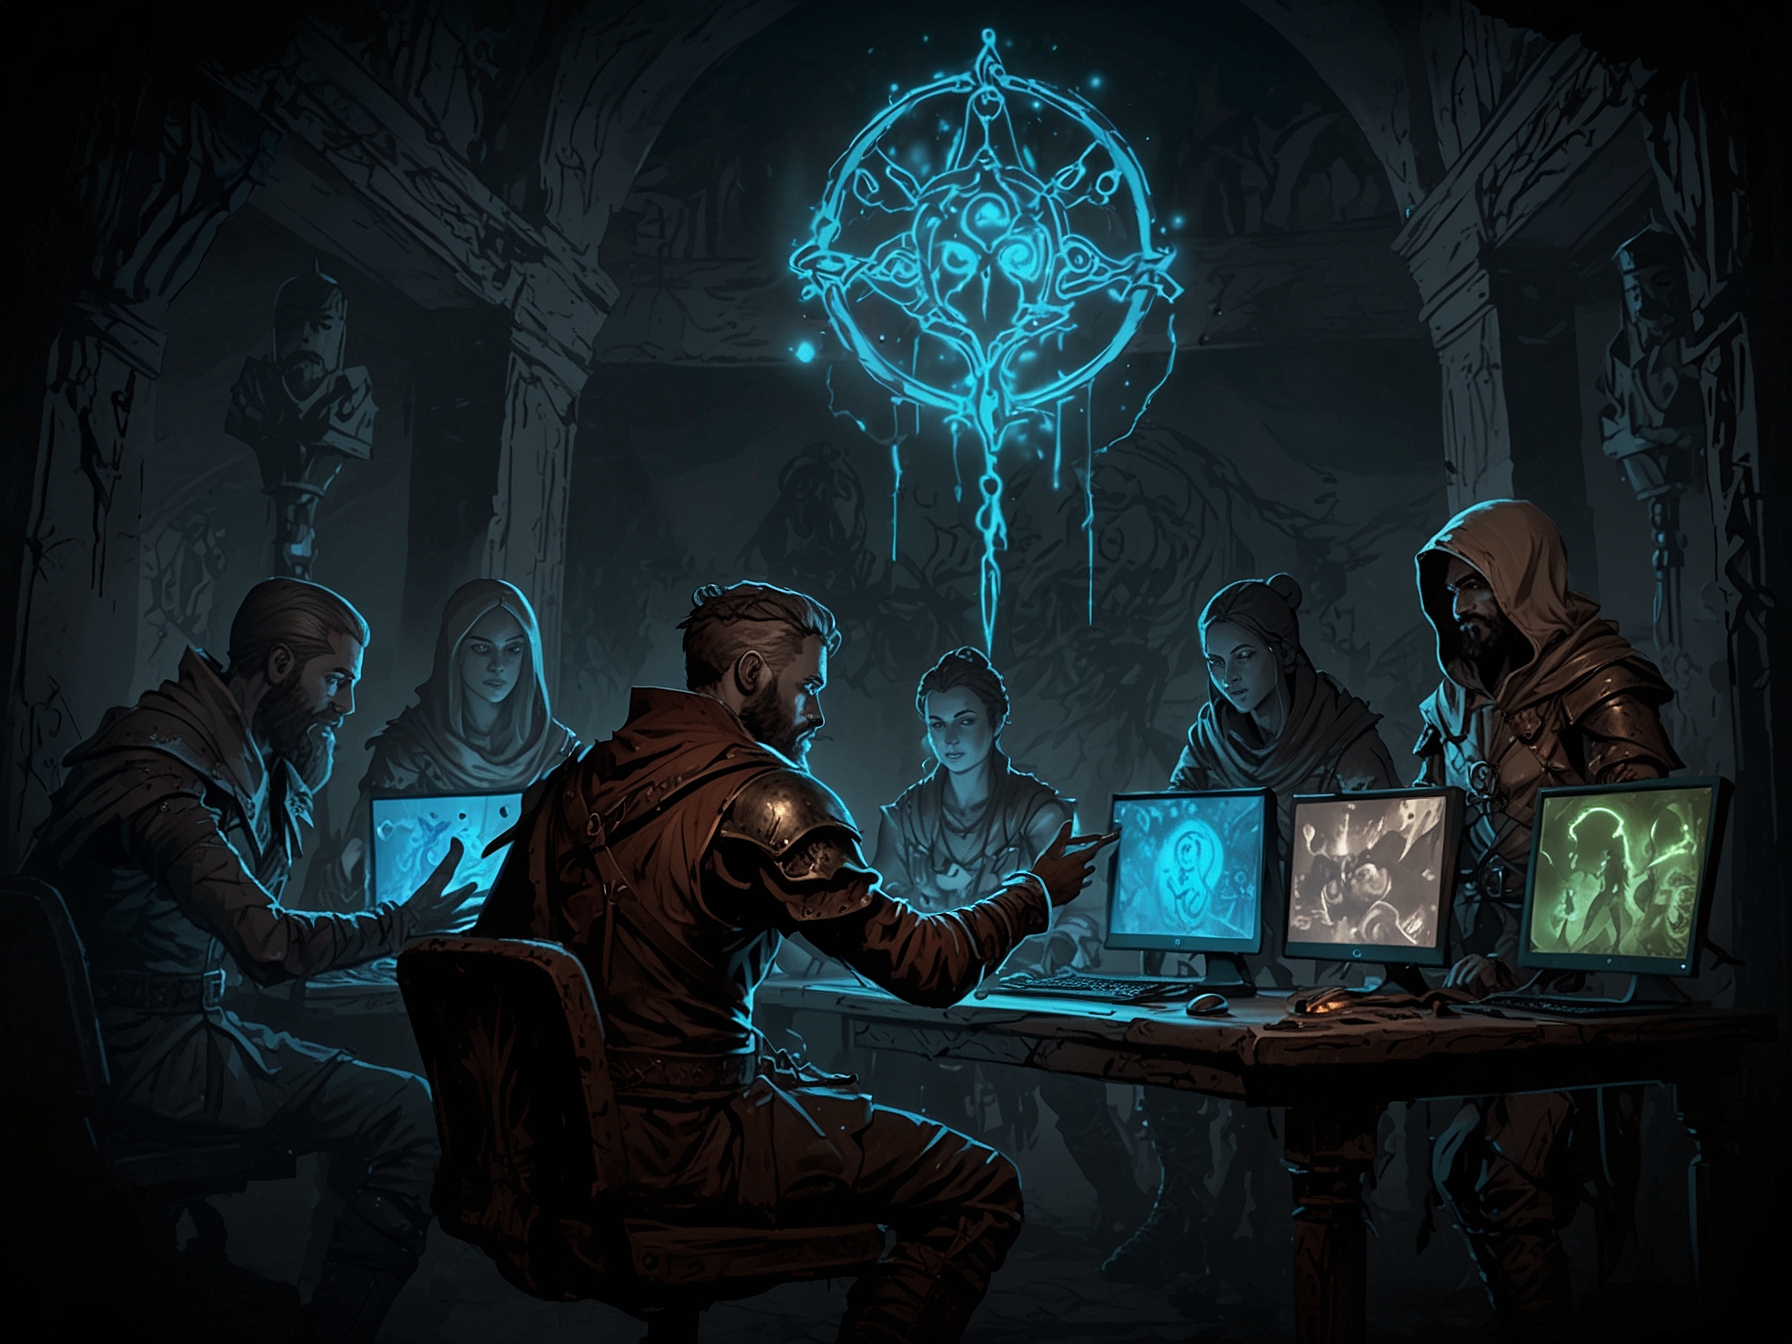 An illustration showing gamers on different platforms looking forward to Path of Exile 2 while questioning cross-platform capabilities.